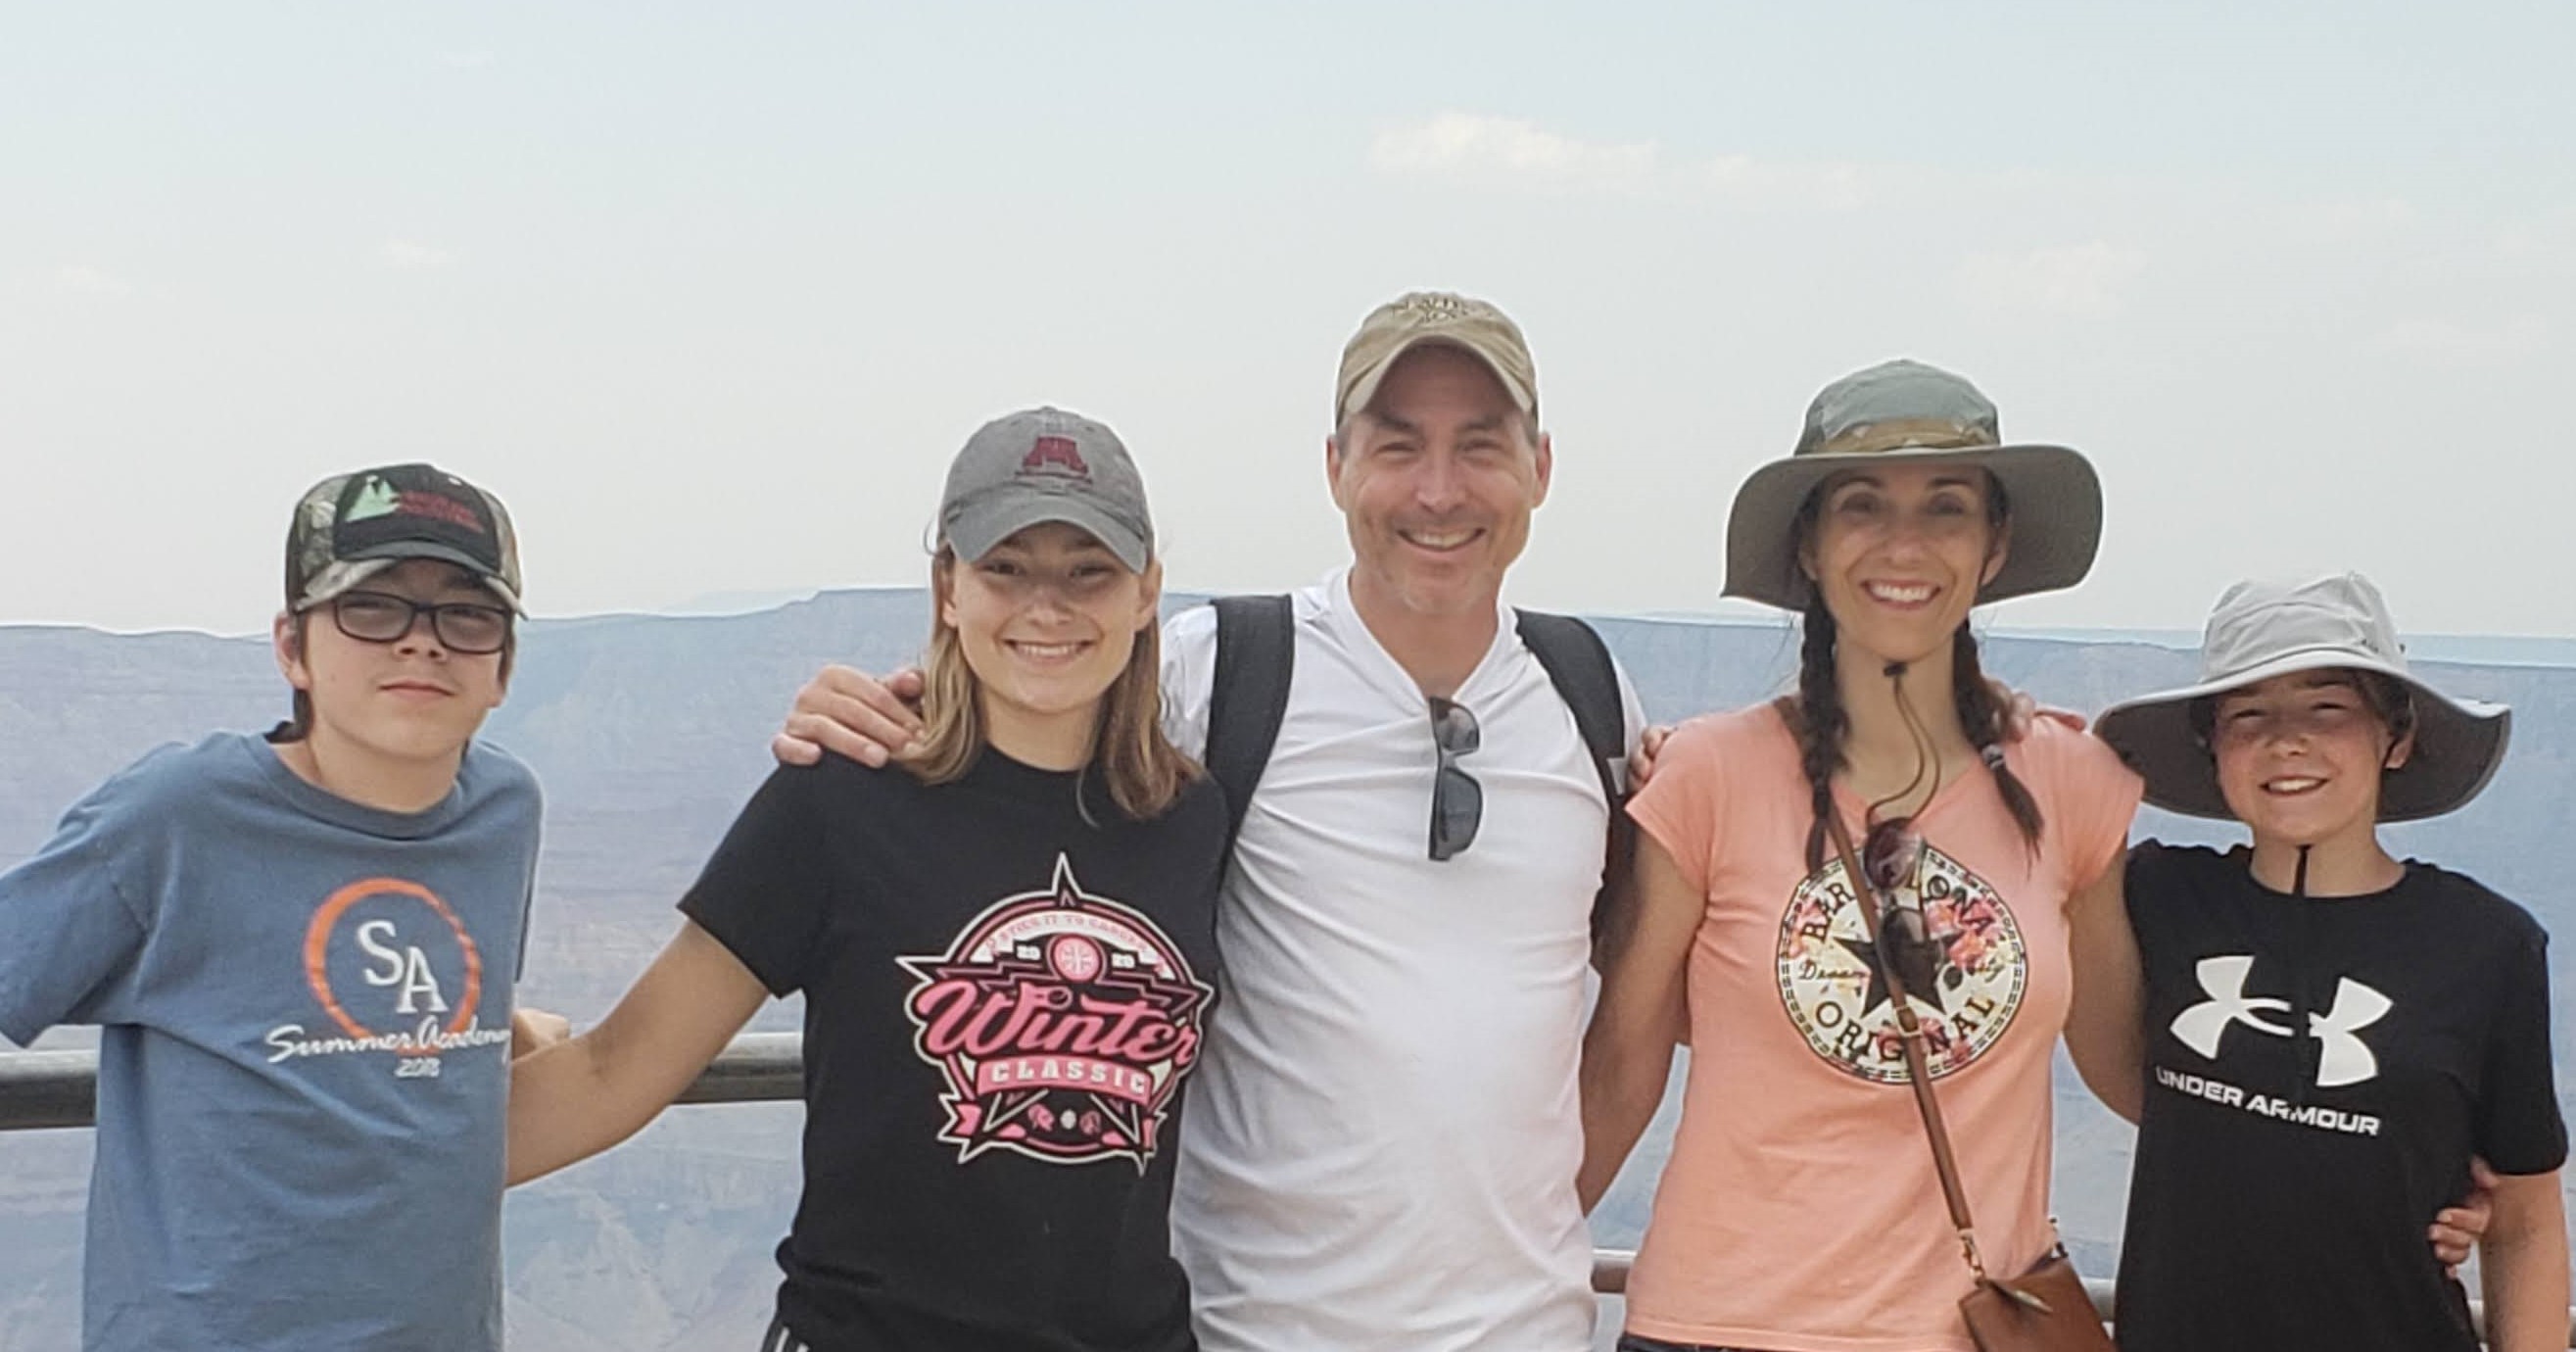 My family during a trip to the Grand Canyon and Zion National Park during the summer of 2021 just prior to starting a sabbatical to work on this book.